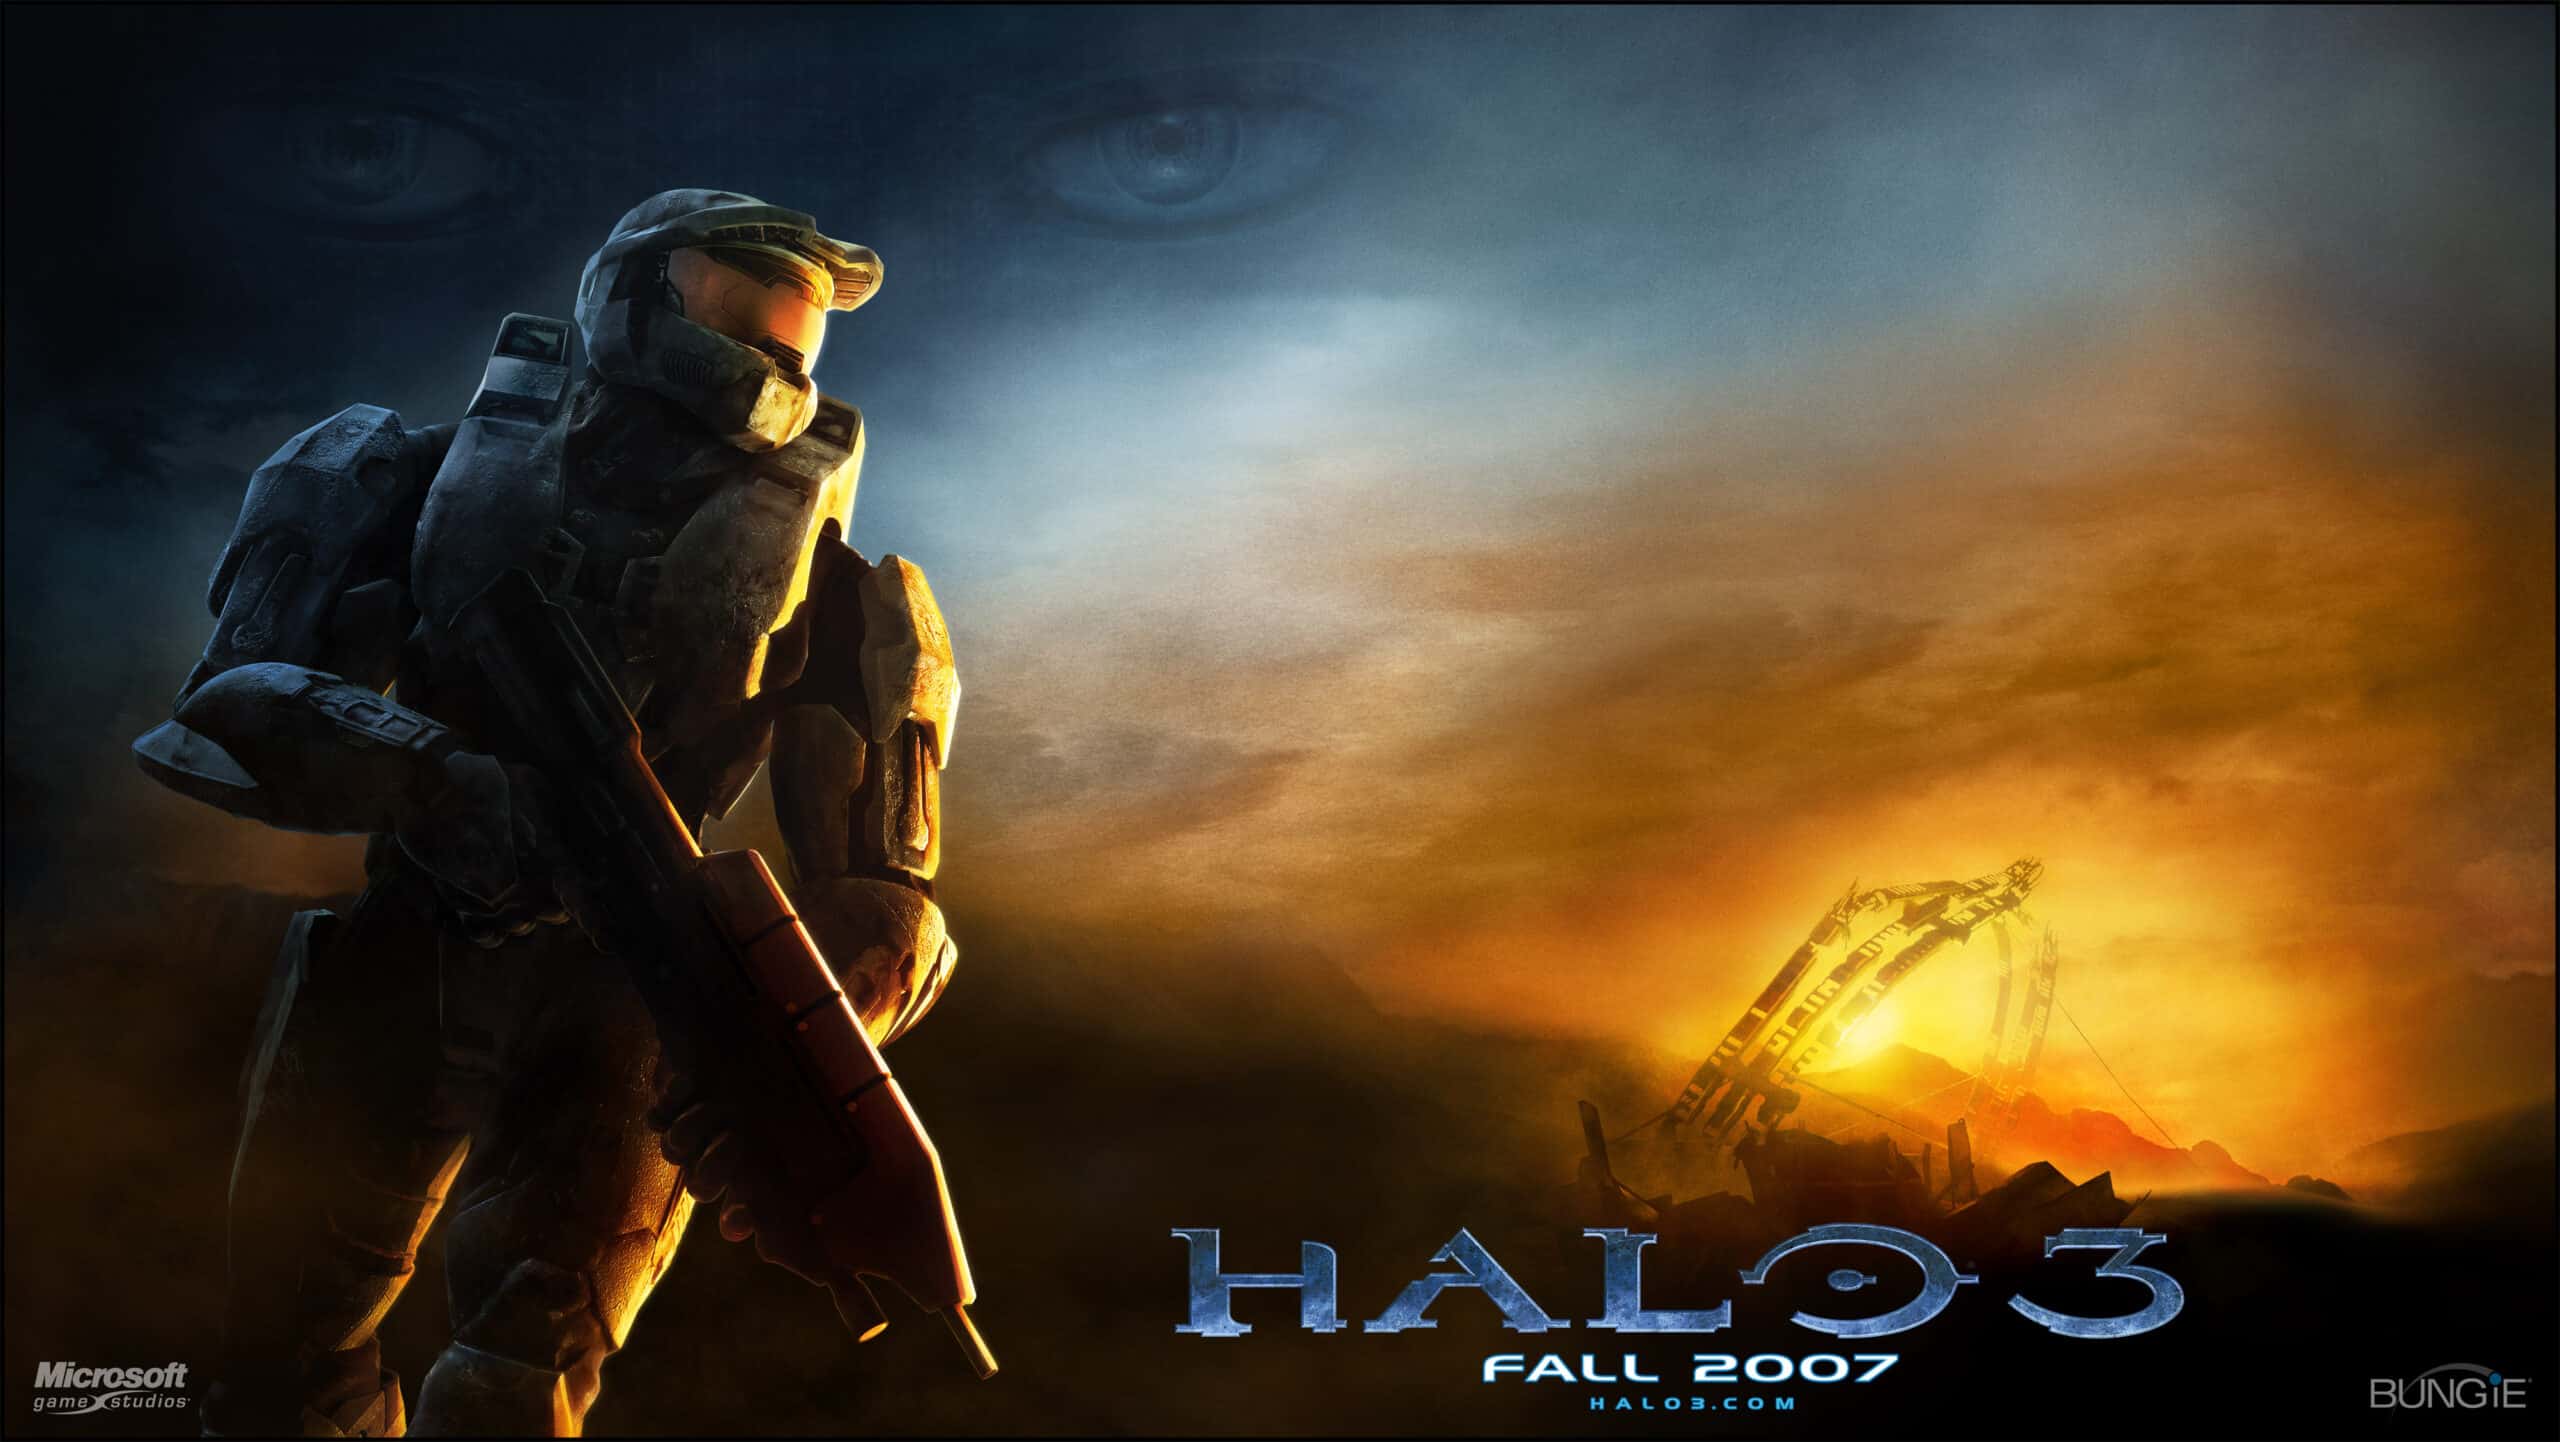  Halo 3 wallpapers.